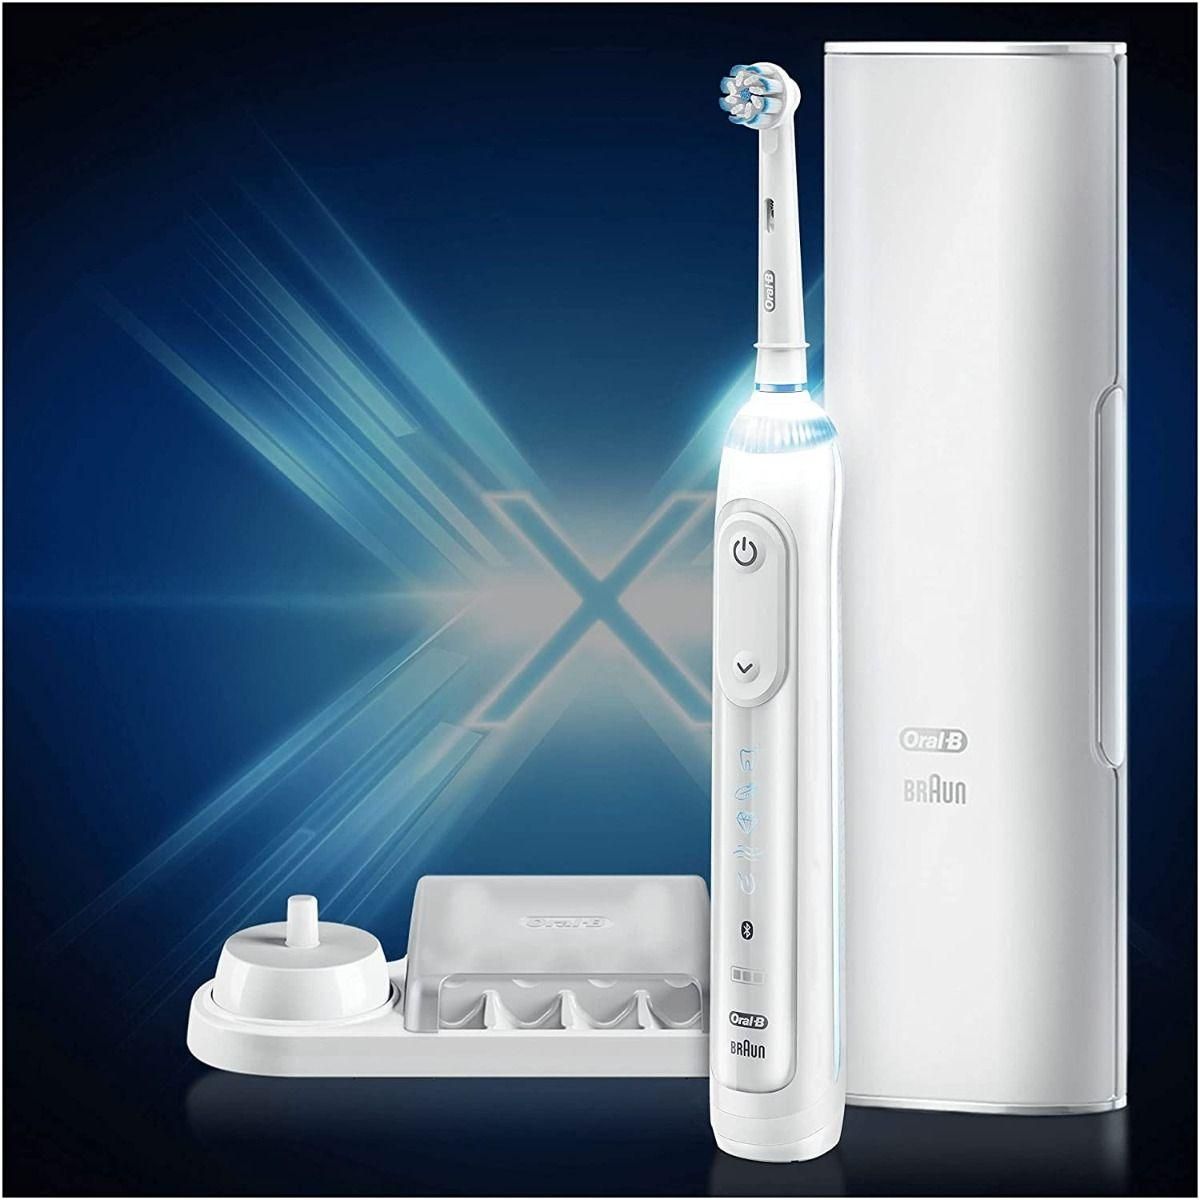 Oral-B Geniux X Rechargeable Toothbrush - Fuji White - New World